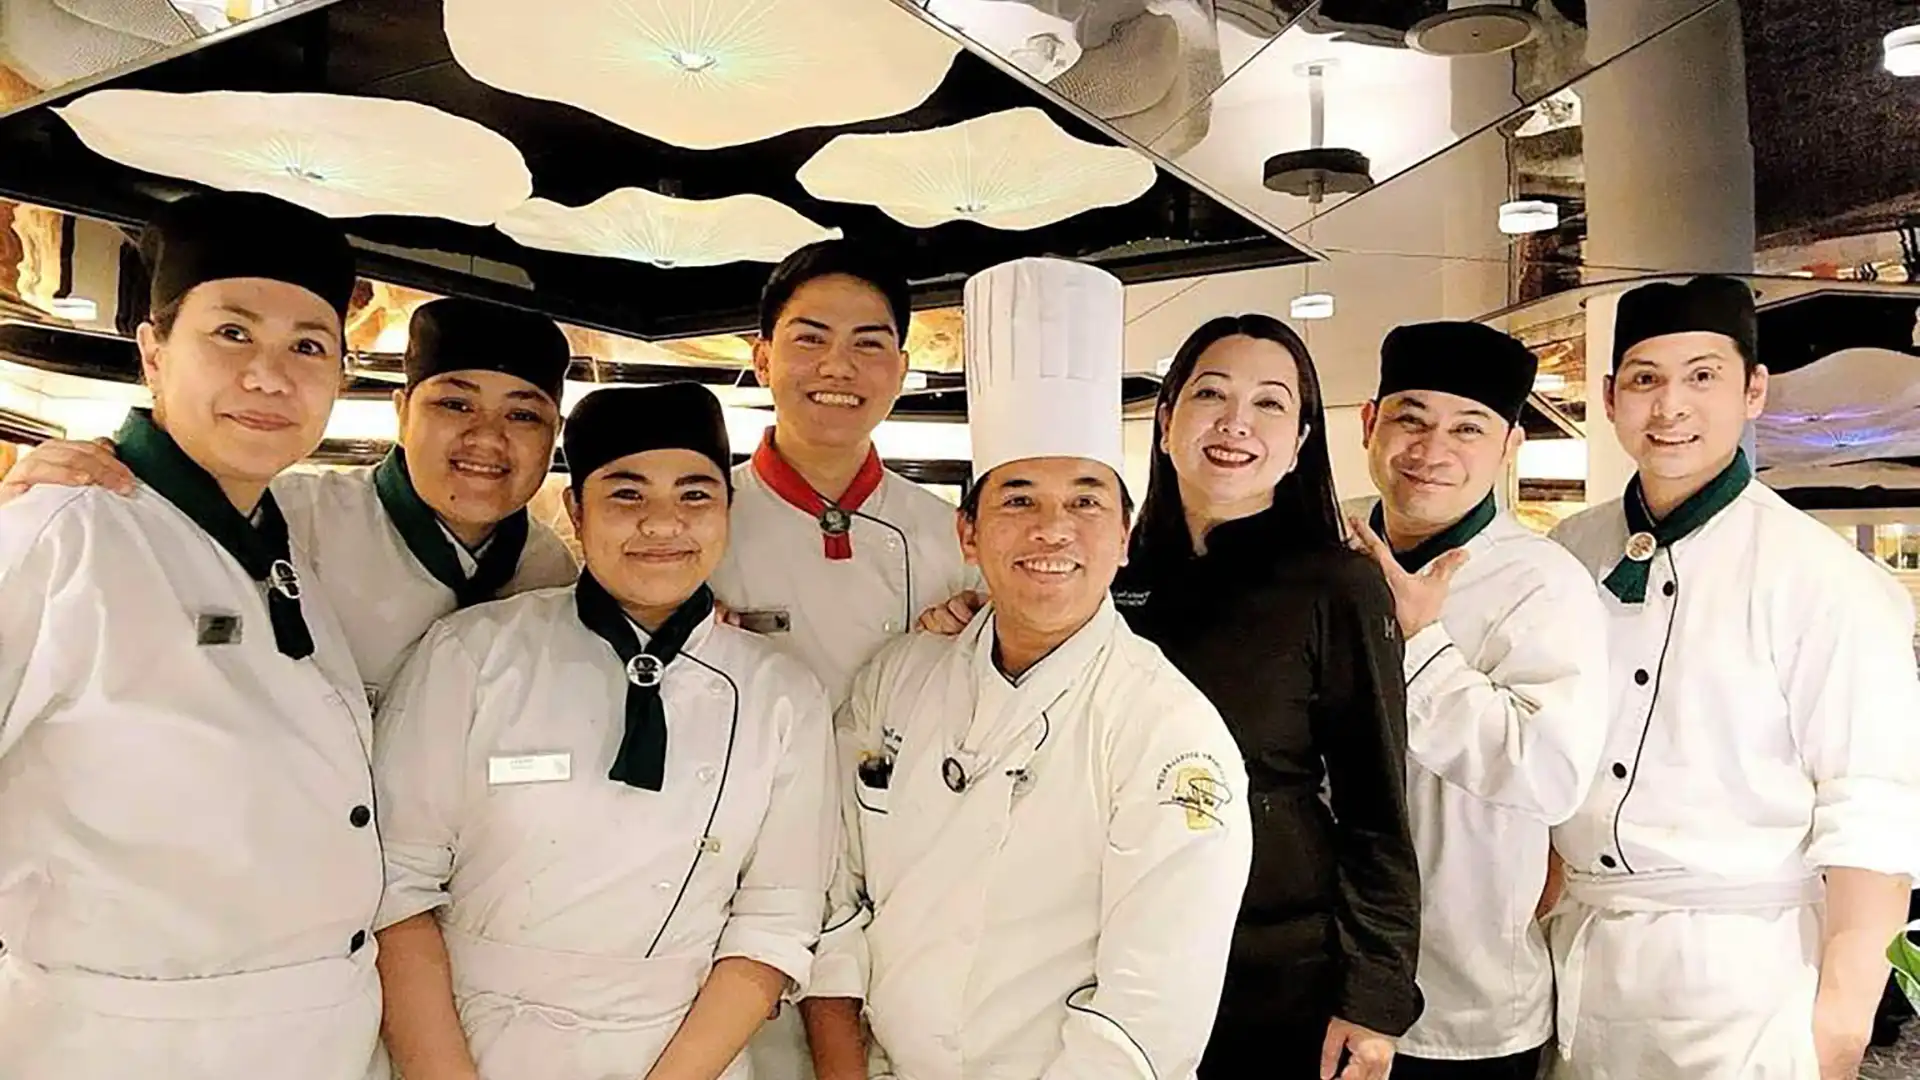 Holland America Line pastry crew in uniform with executive pastry chef.